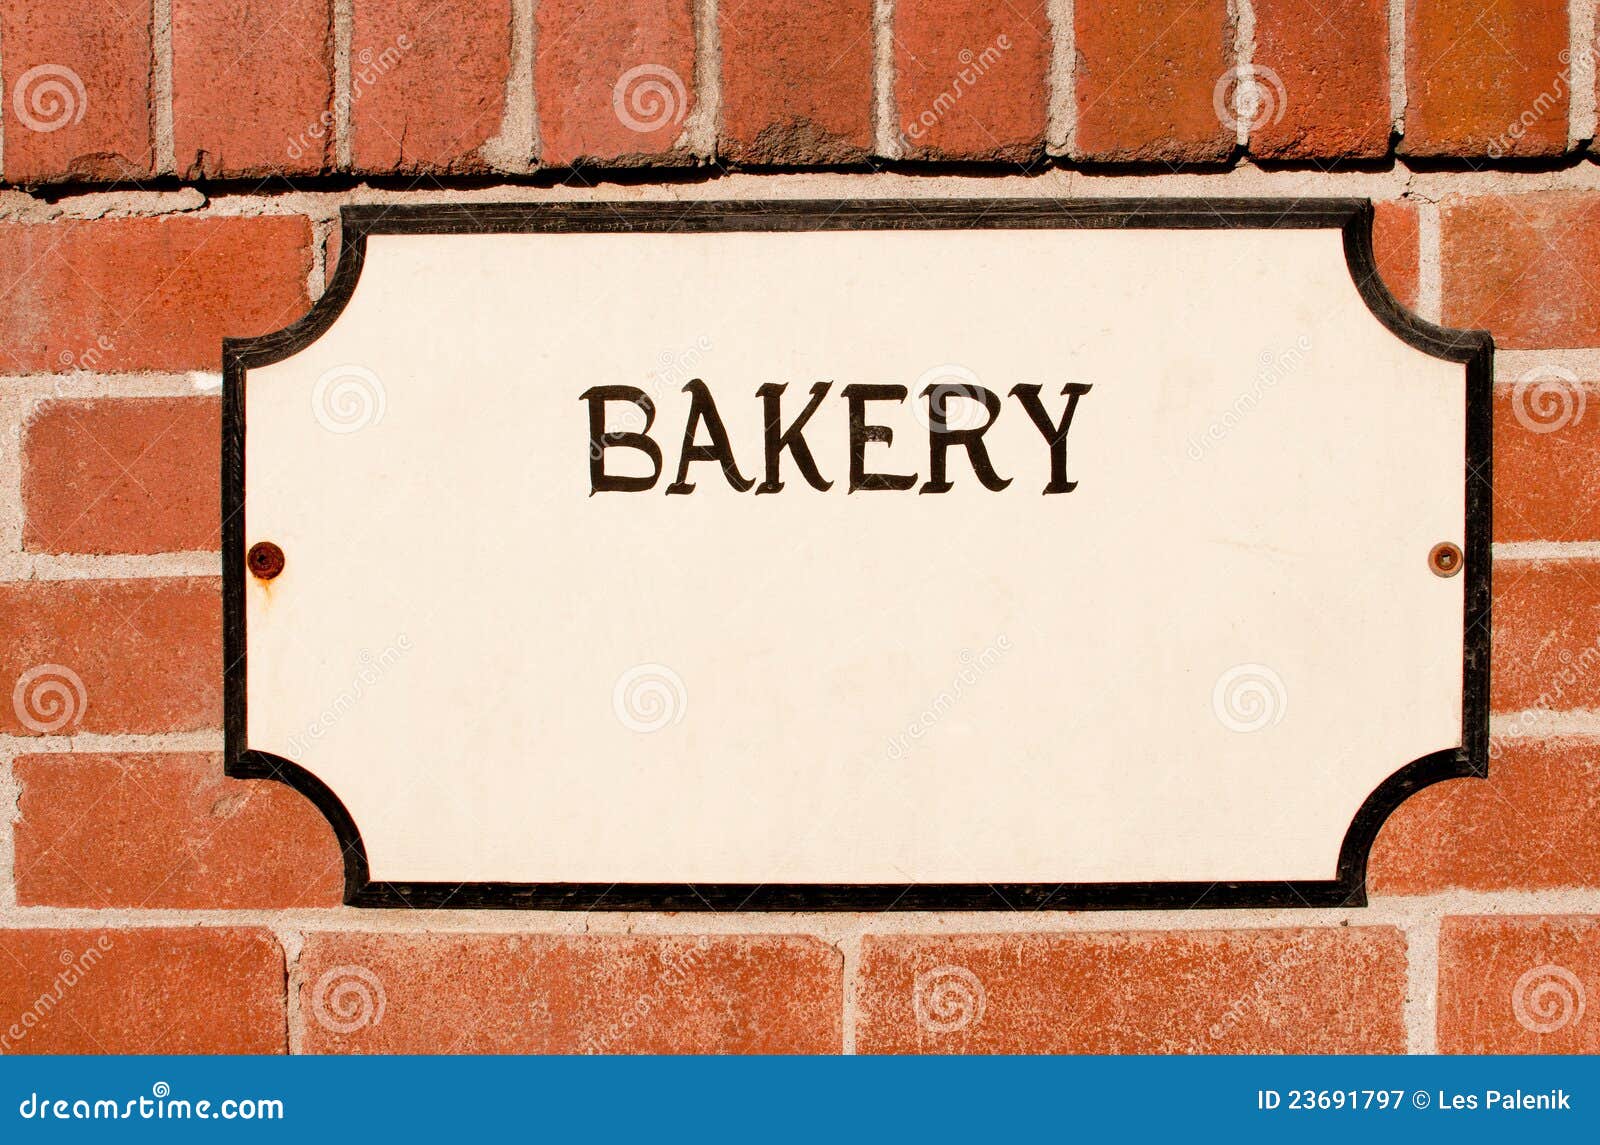 bakery-sign-stock-image-image-of-bakery-store-wall-23691797